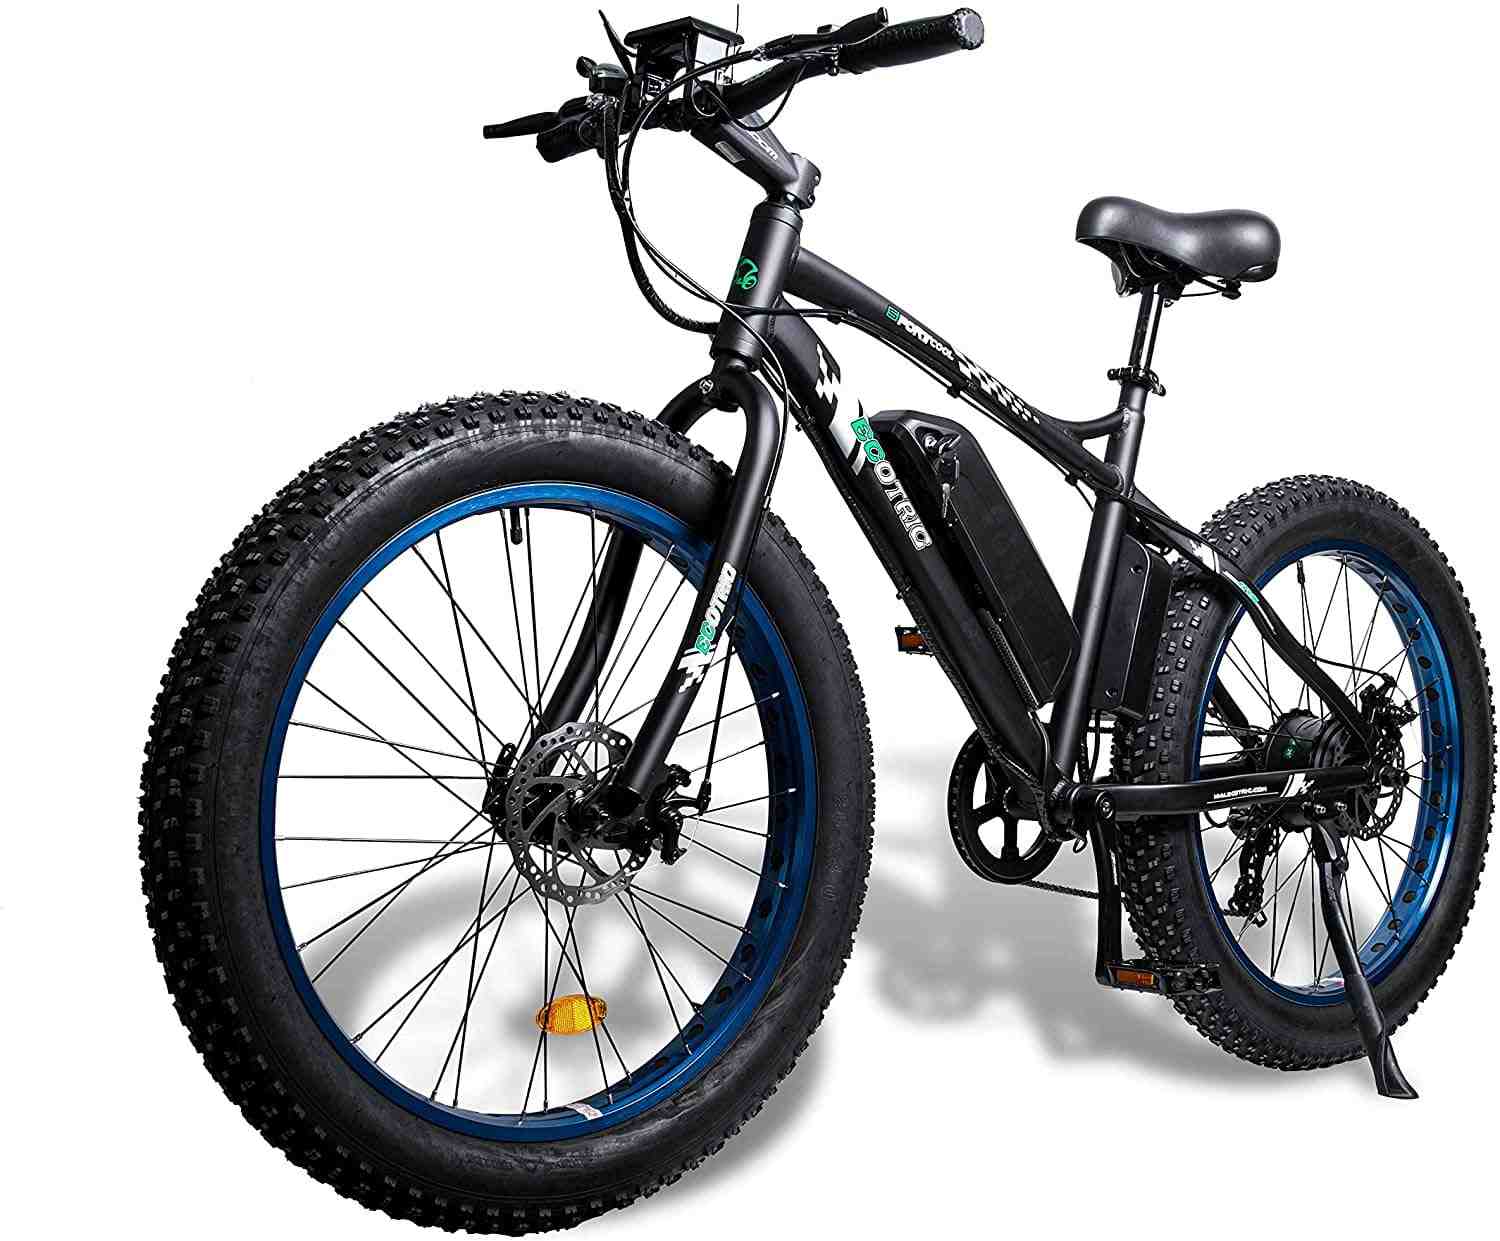 What is the best electric mountain bike for the money?